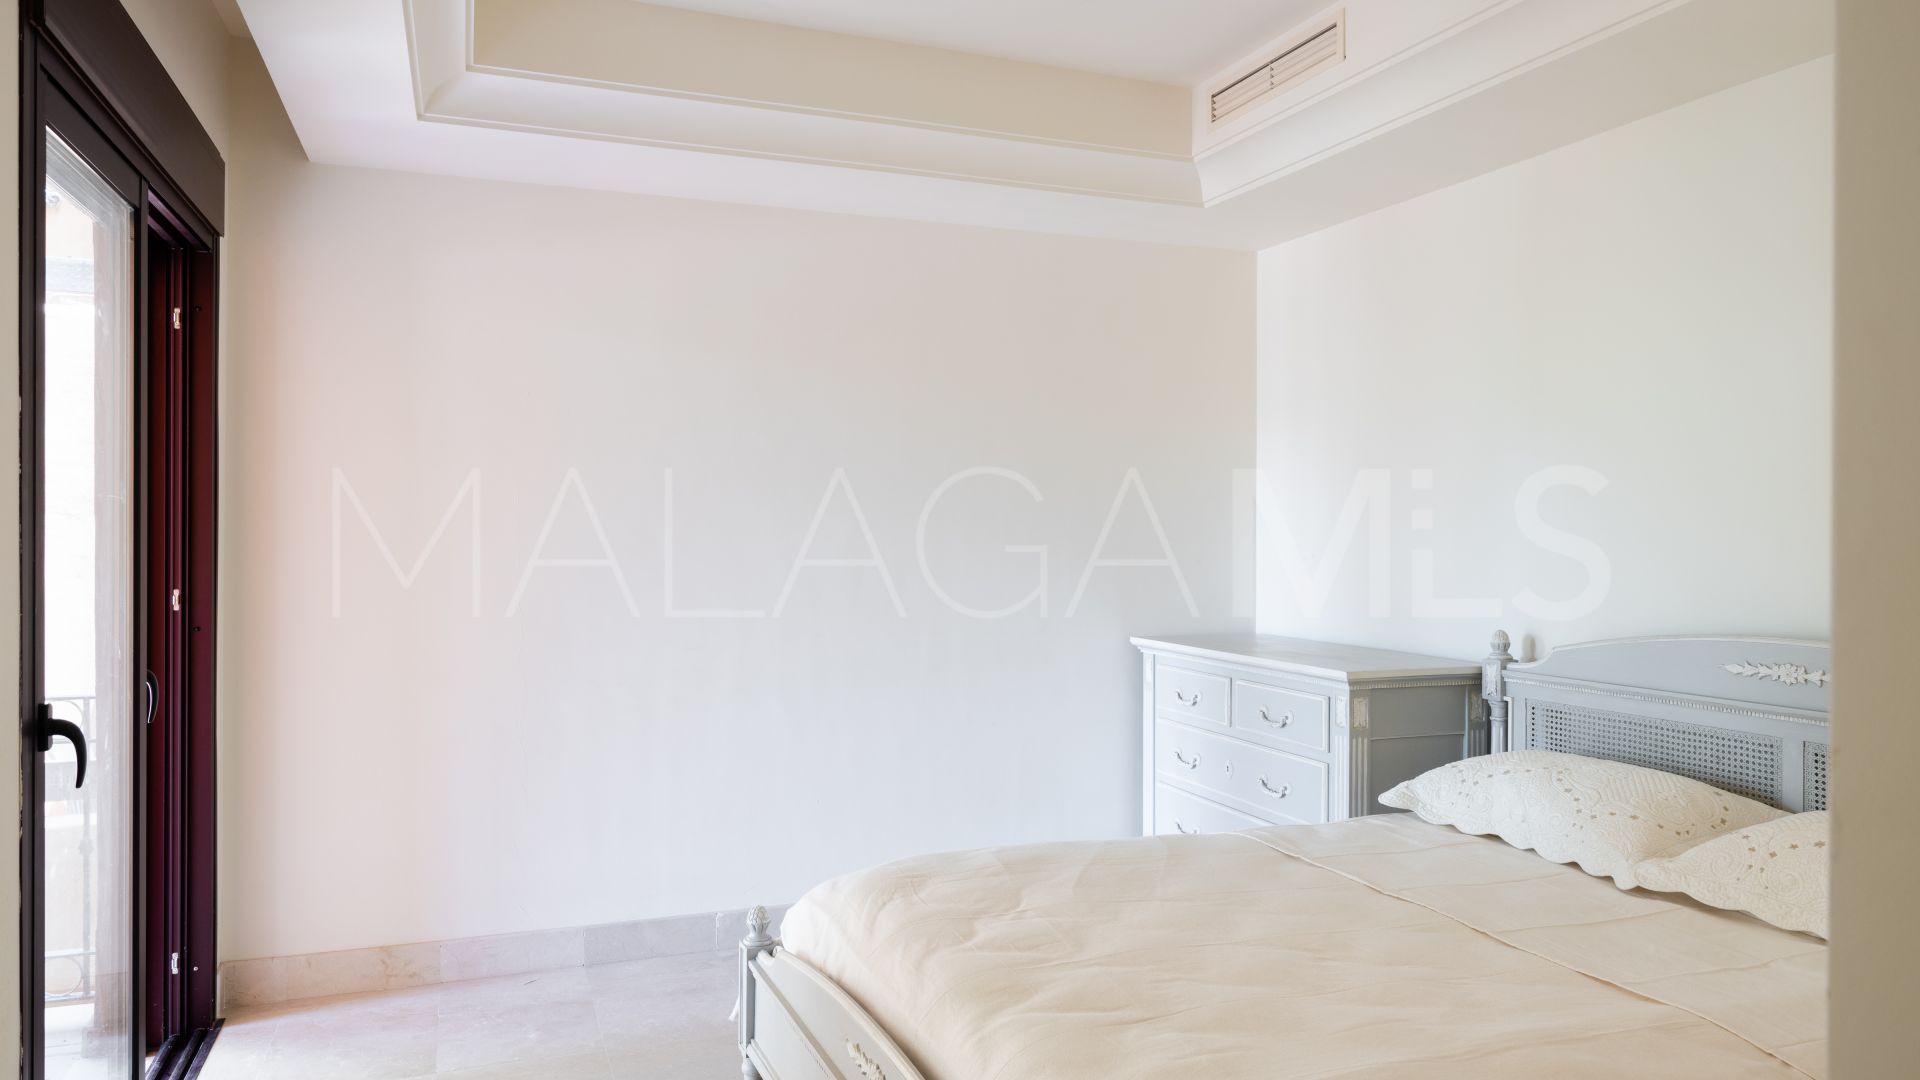 Ground floor apartment with 3 bedrooms for sale in Marbella - Puerto Banus